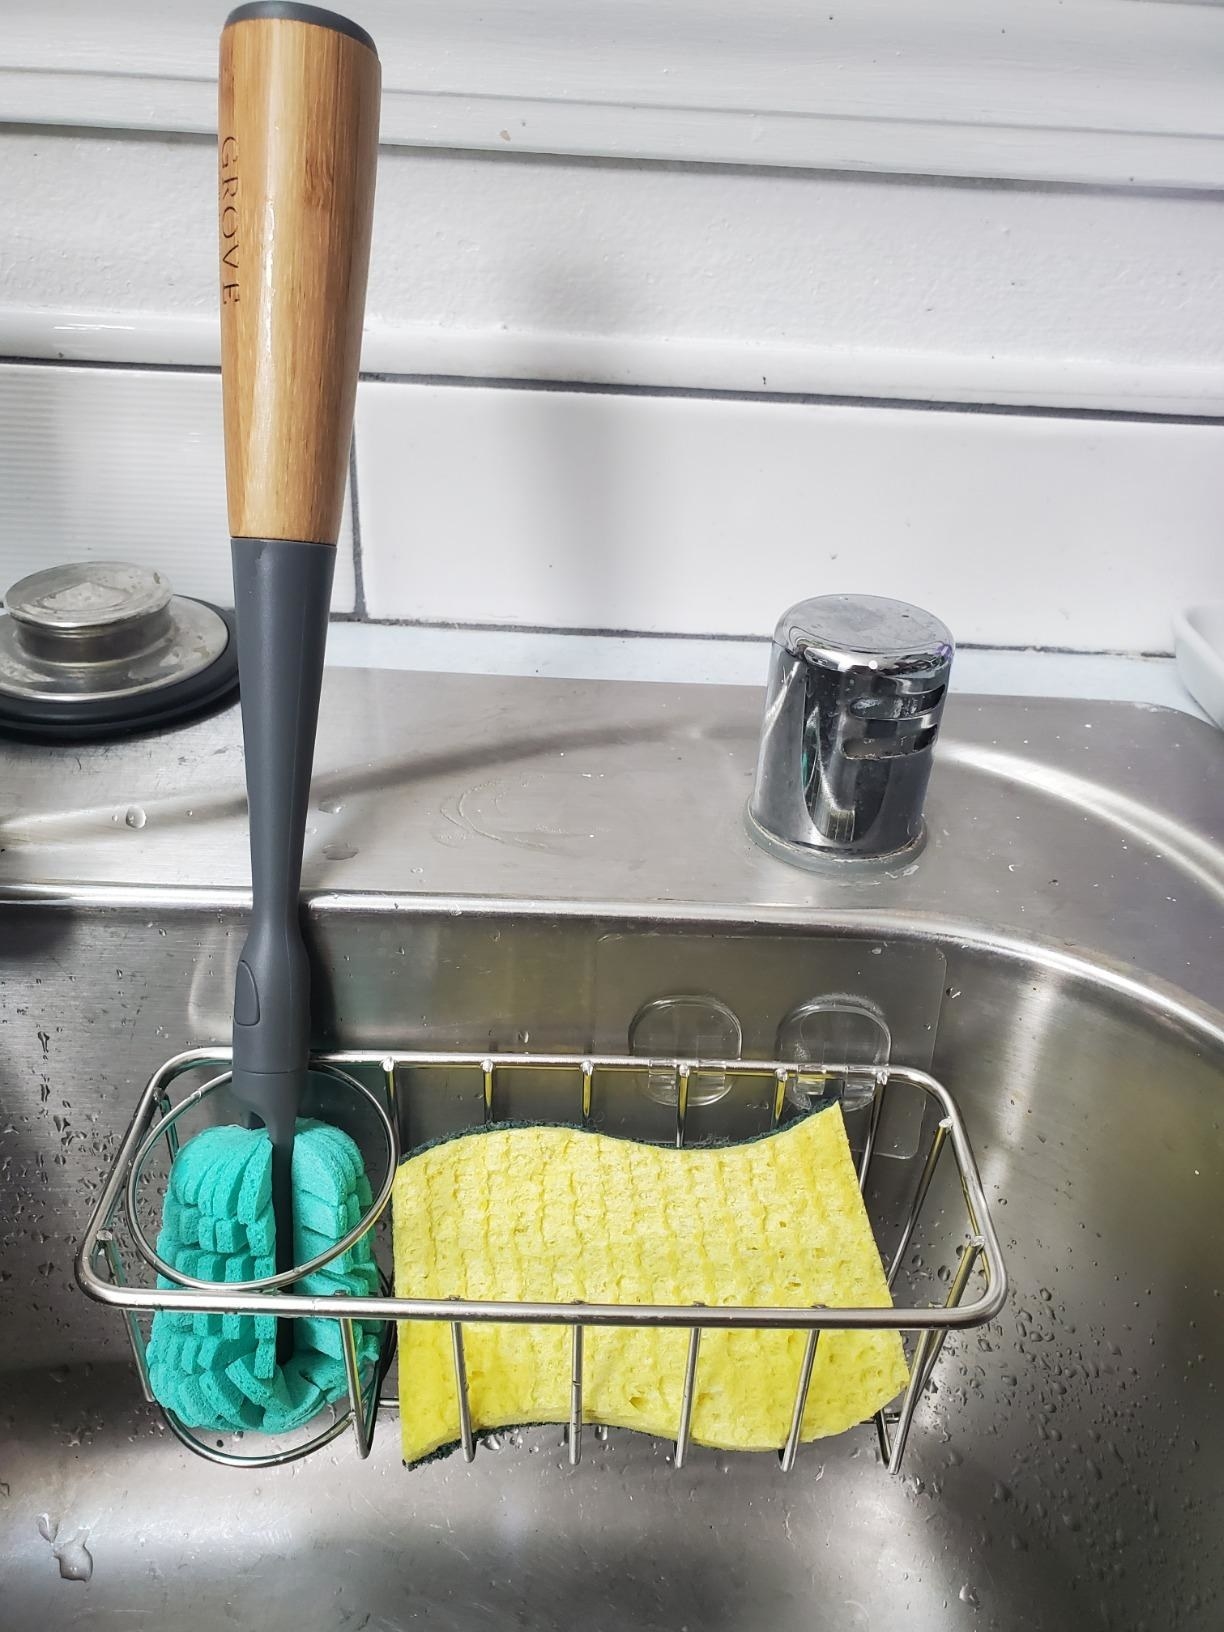 Reviewer image of sink caddy with sponges